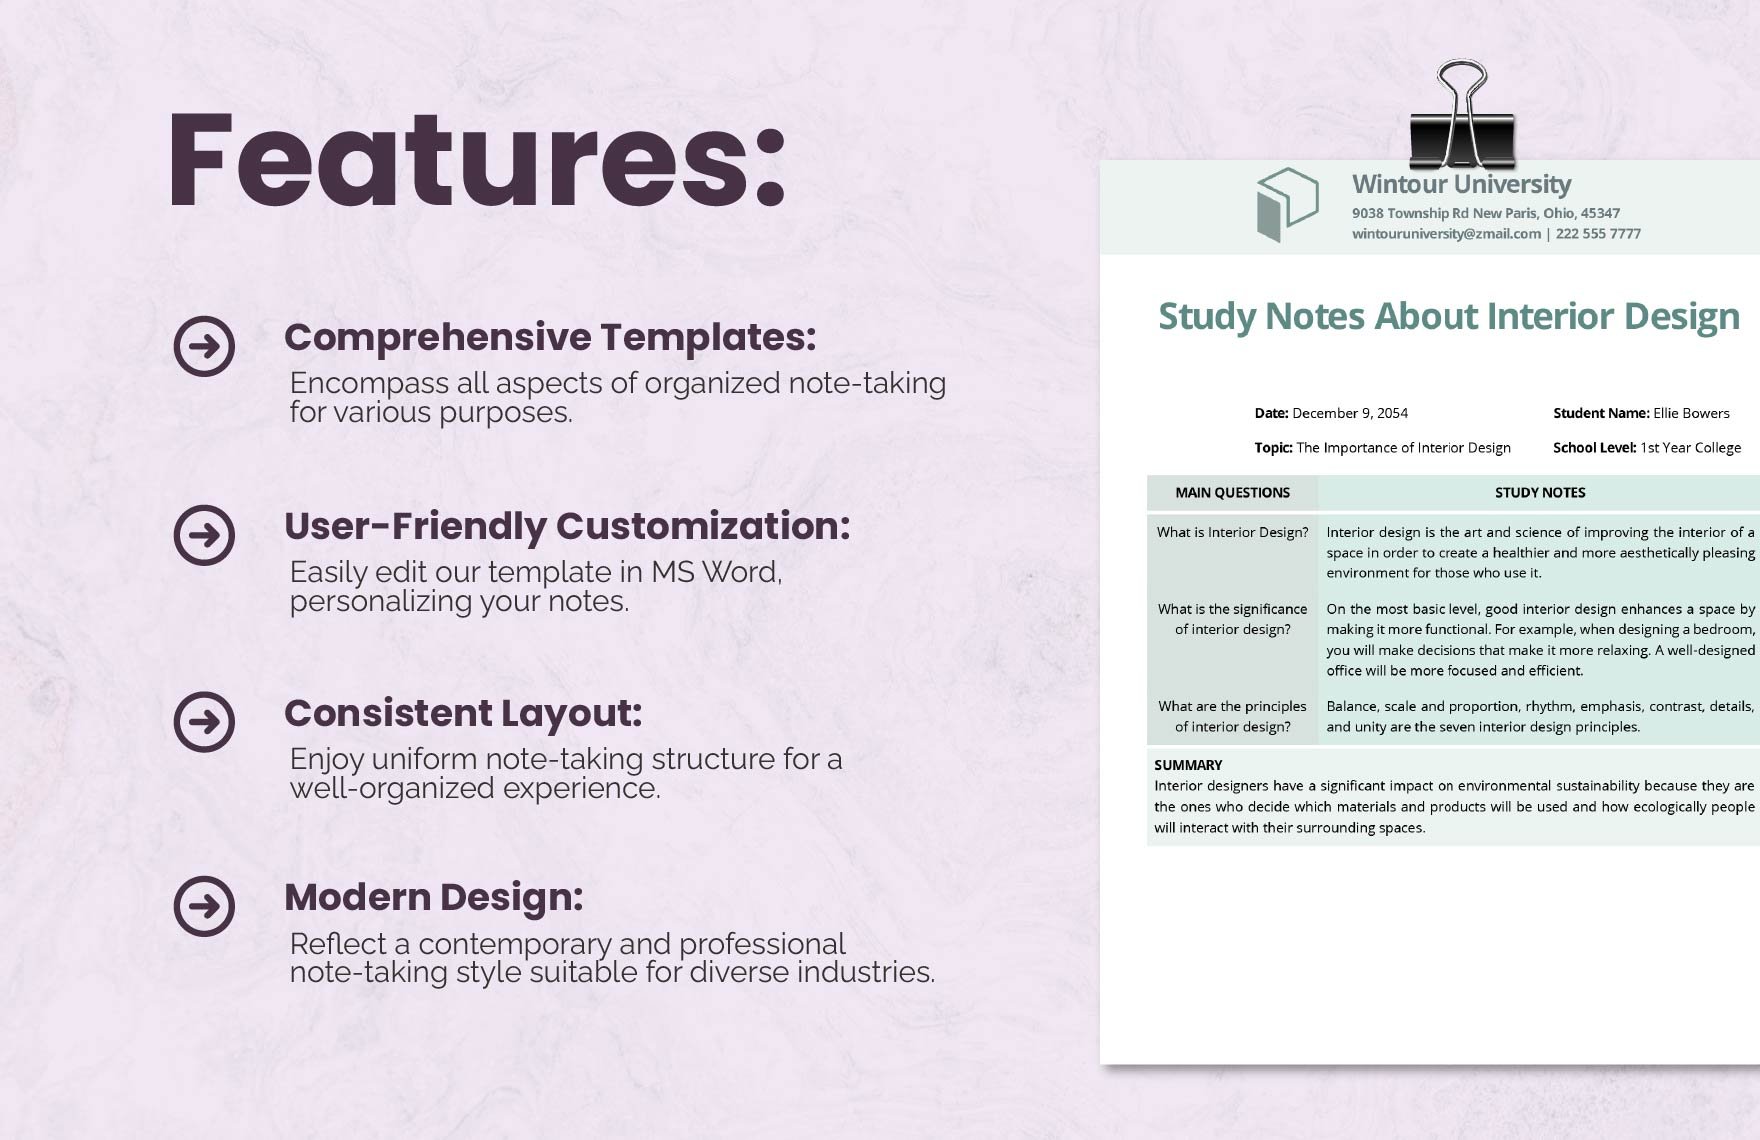 Modern Notes Taking Template